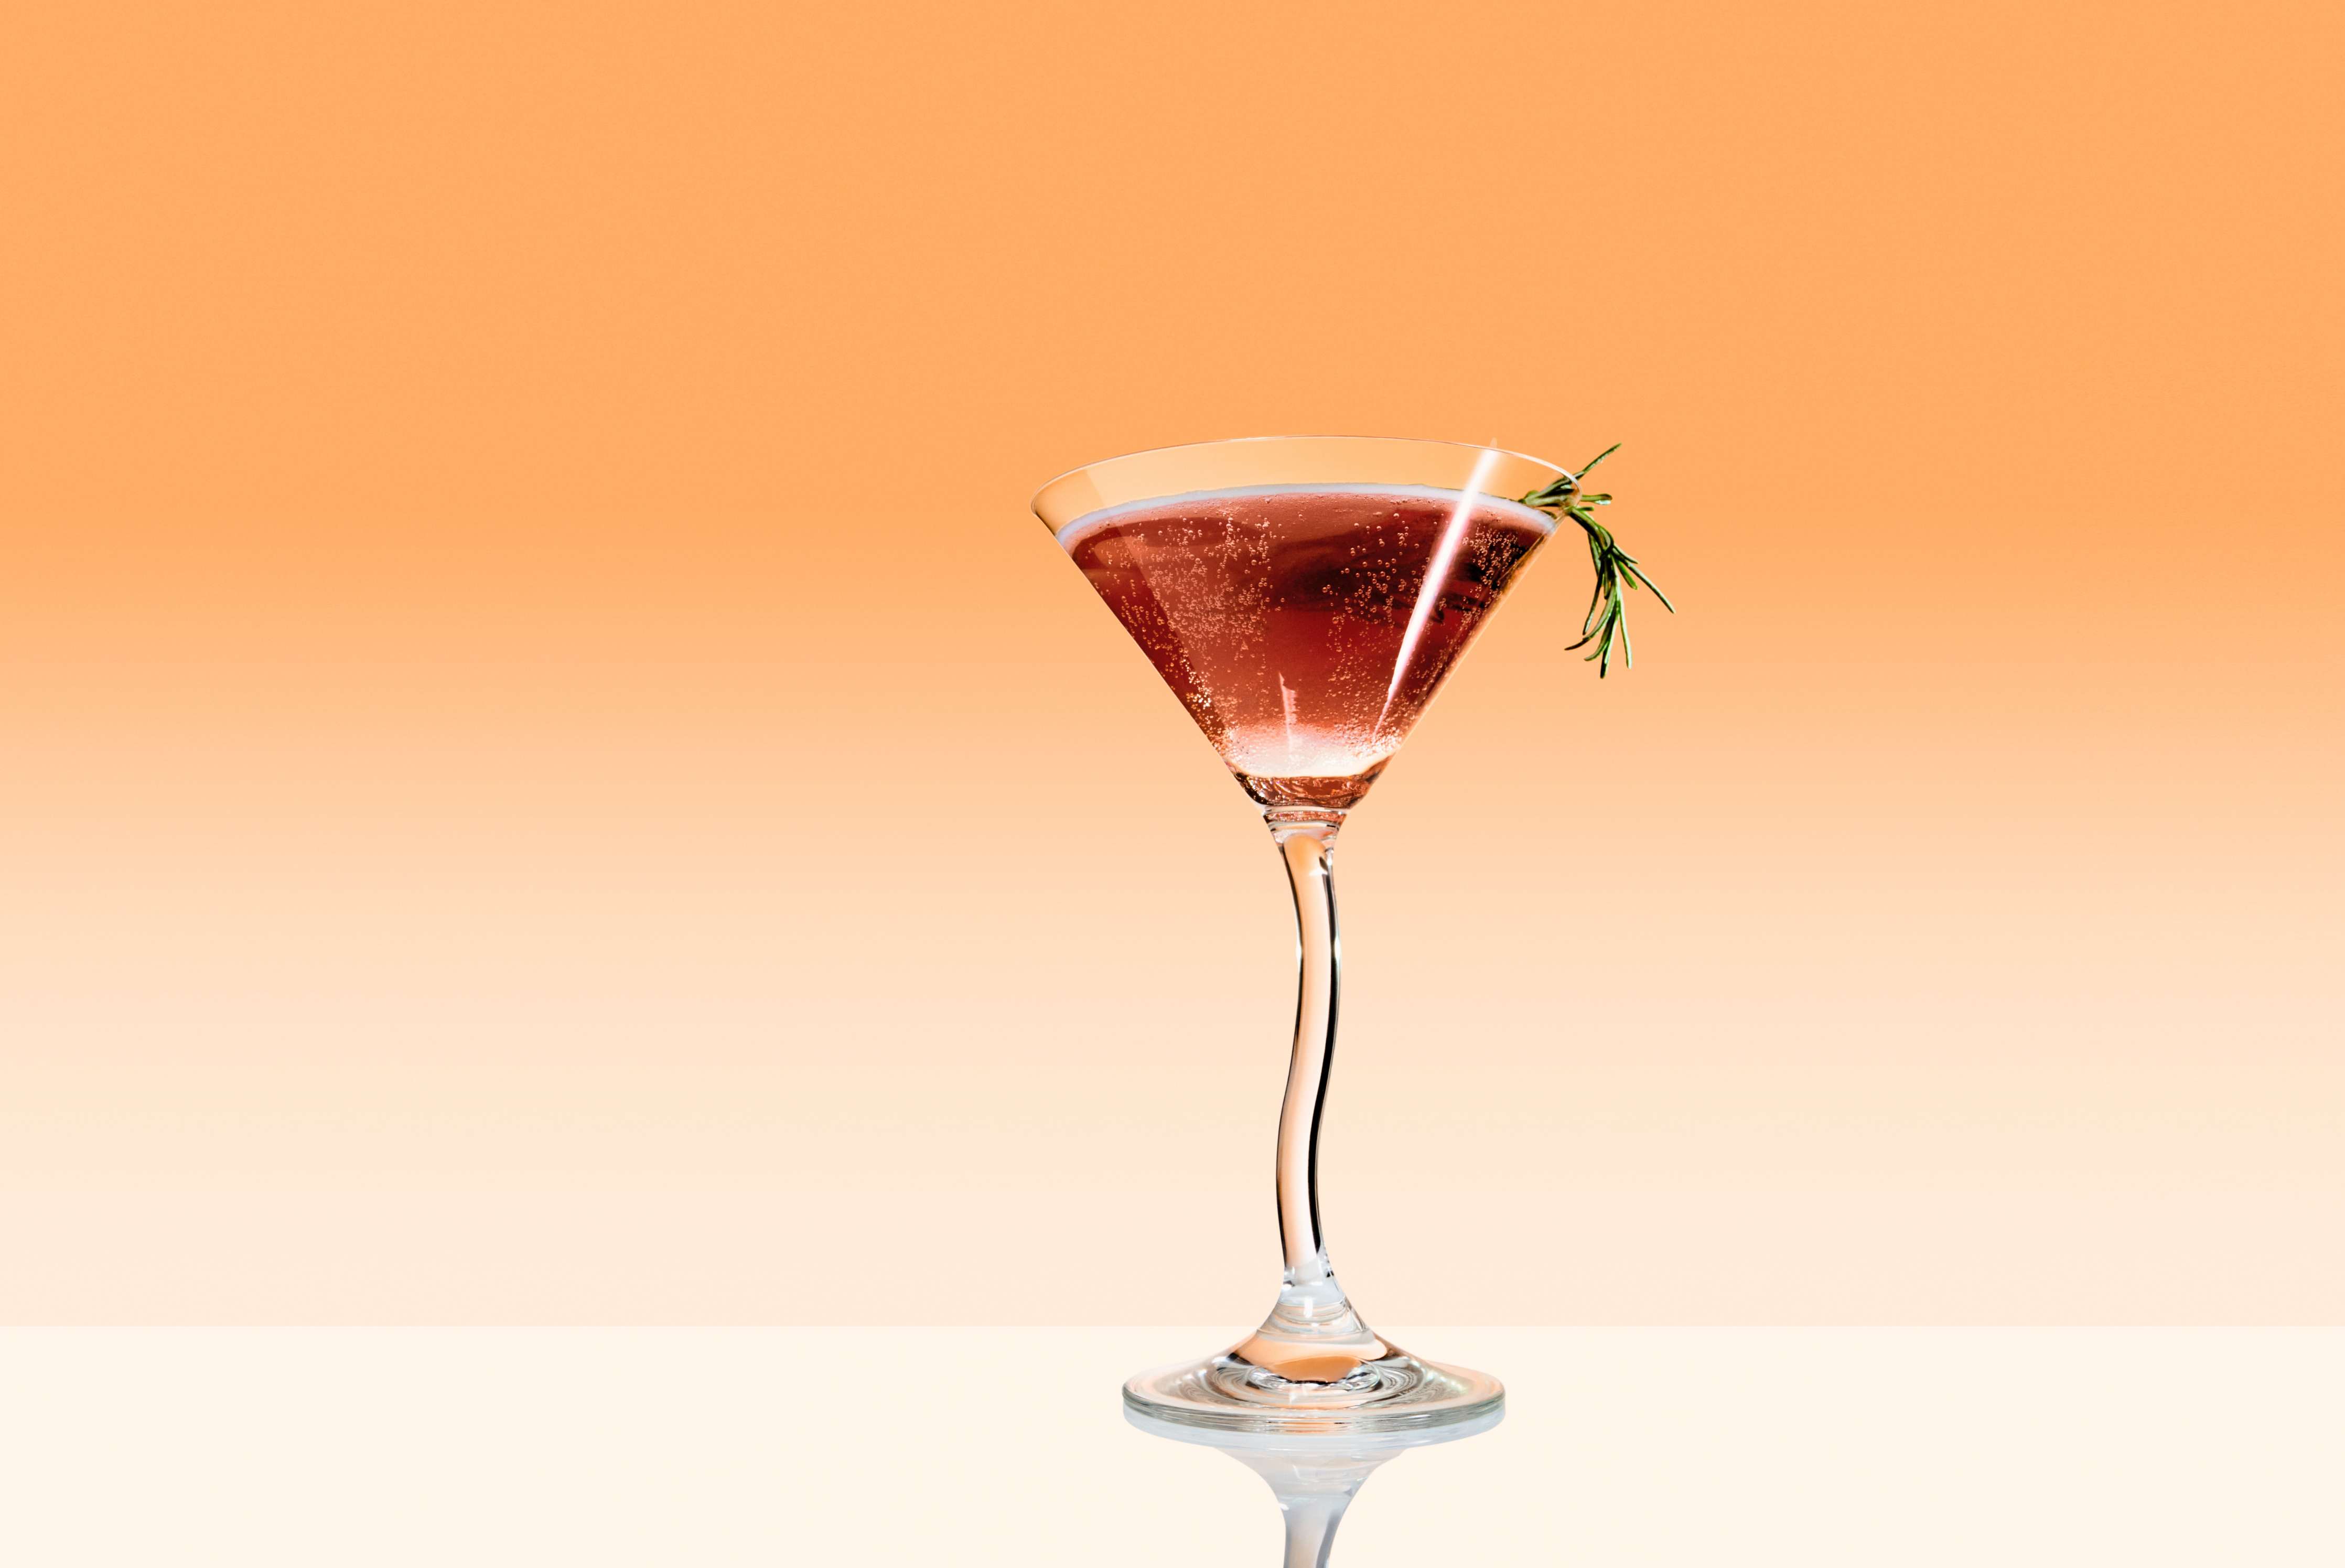 Douze Apricot & Za'atar in a tall martini glass on an orange background